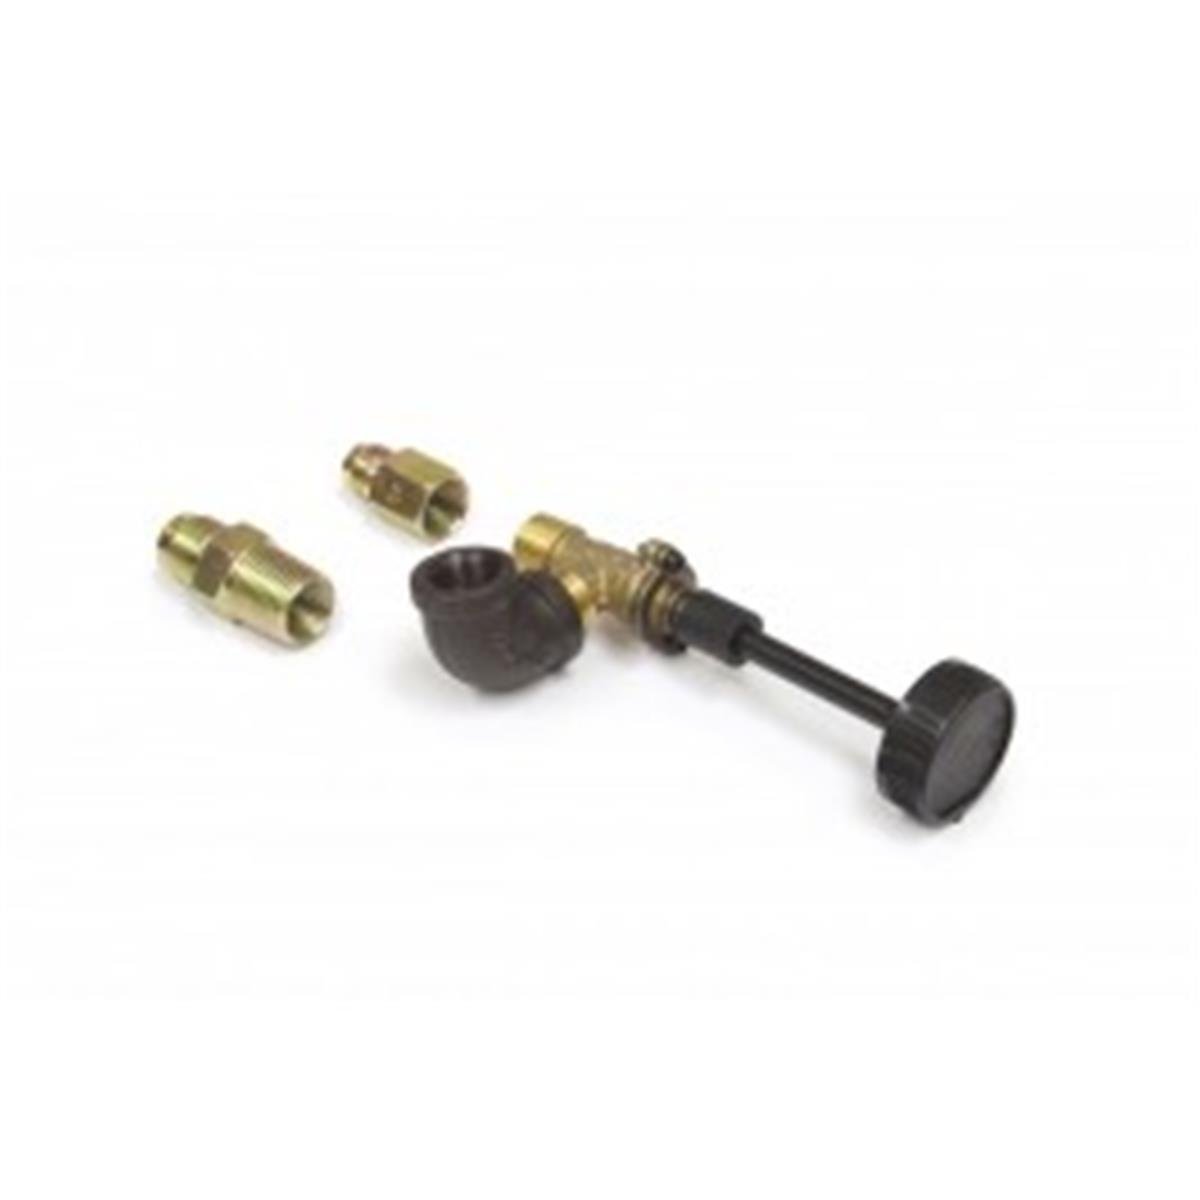 Products Av17 Manual On & Off Valve With Knob Handle